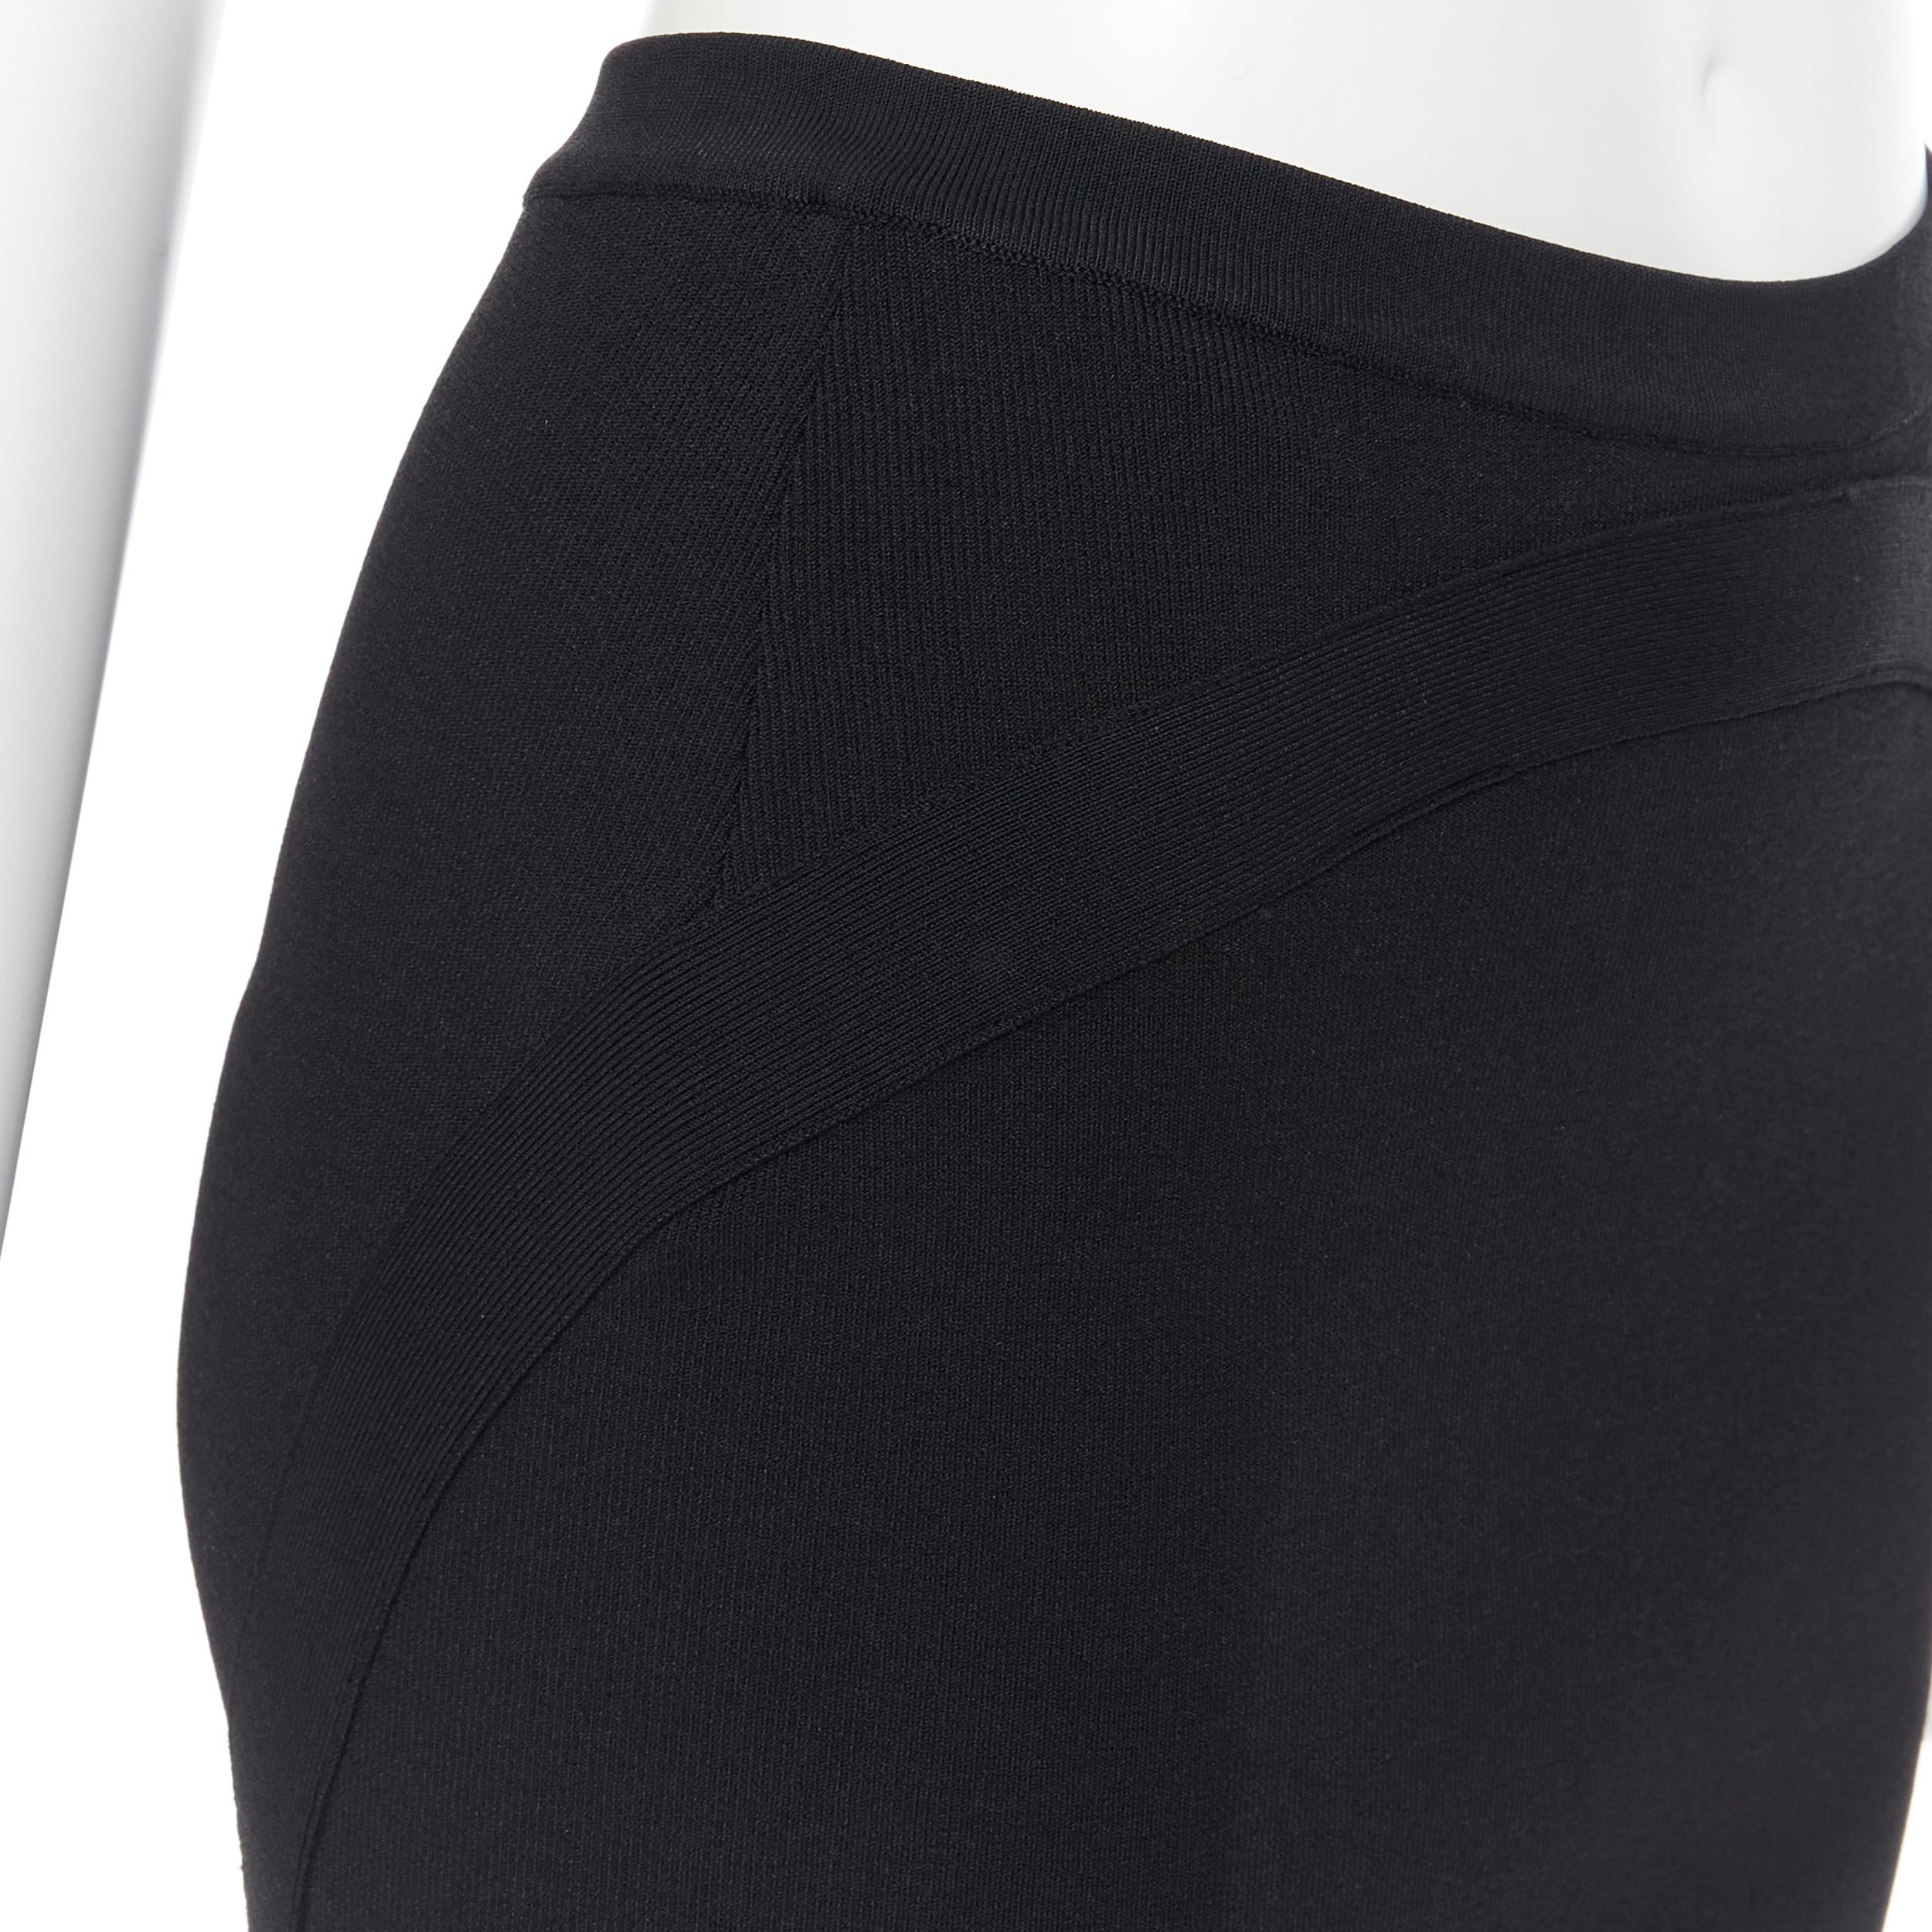 GIVENCHY black viscose knit curved circular trimming stretch pencil skirt S 
Reference: LNKO/A01762 
Brand: Givenchy 
Designer: Riccardo Tisci 
Material: Viscose 
Color: Black 
Pattern: Solid 
Closure: Zip 
Extra Detail: Stretch fit. Side zip